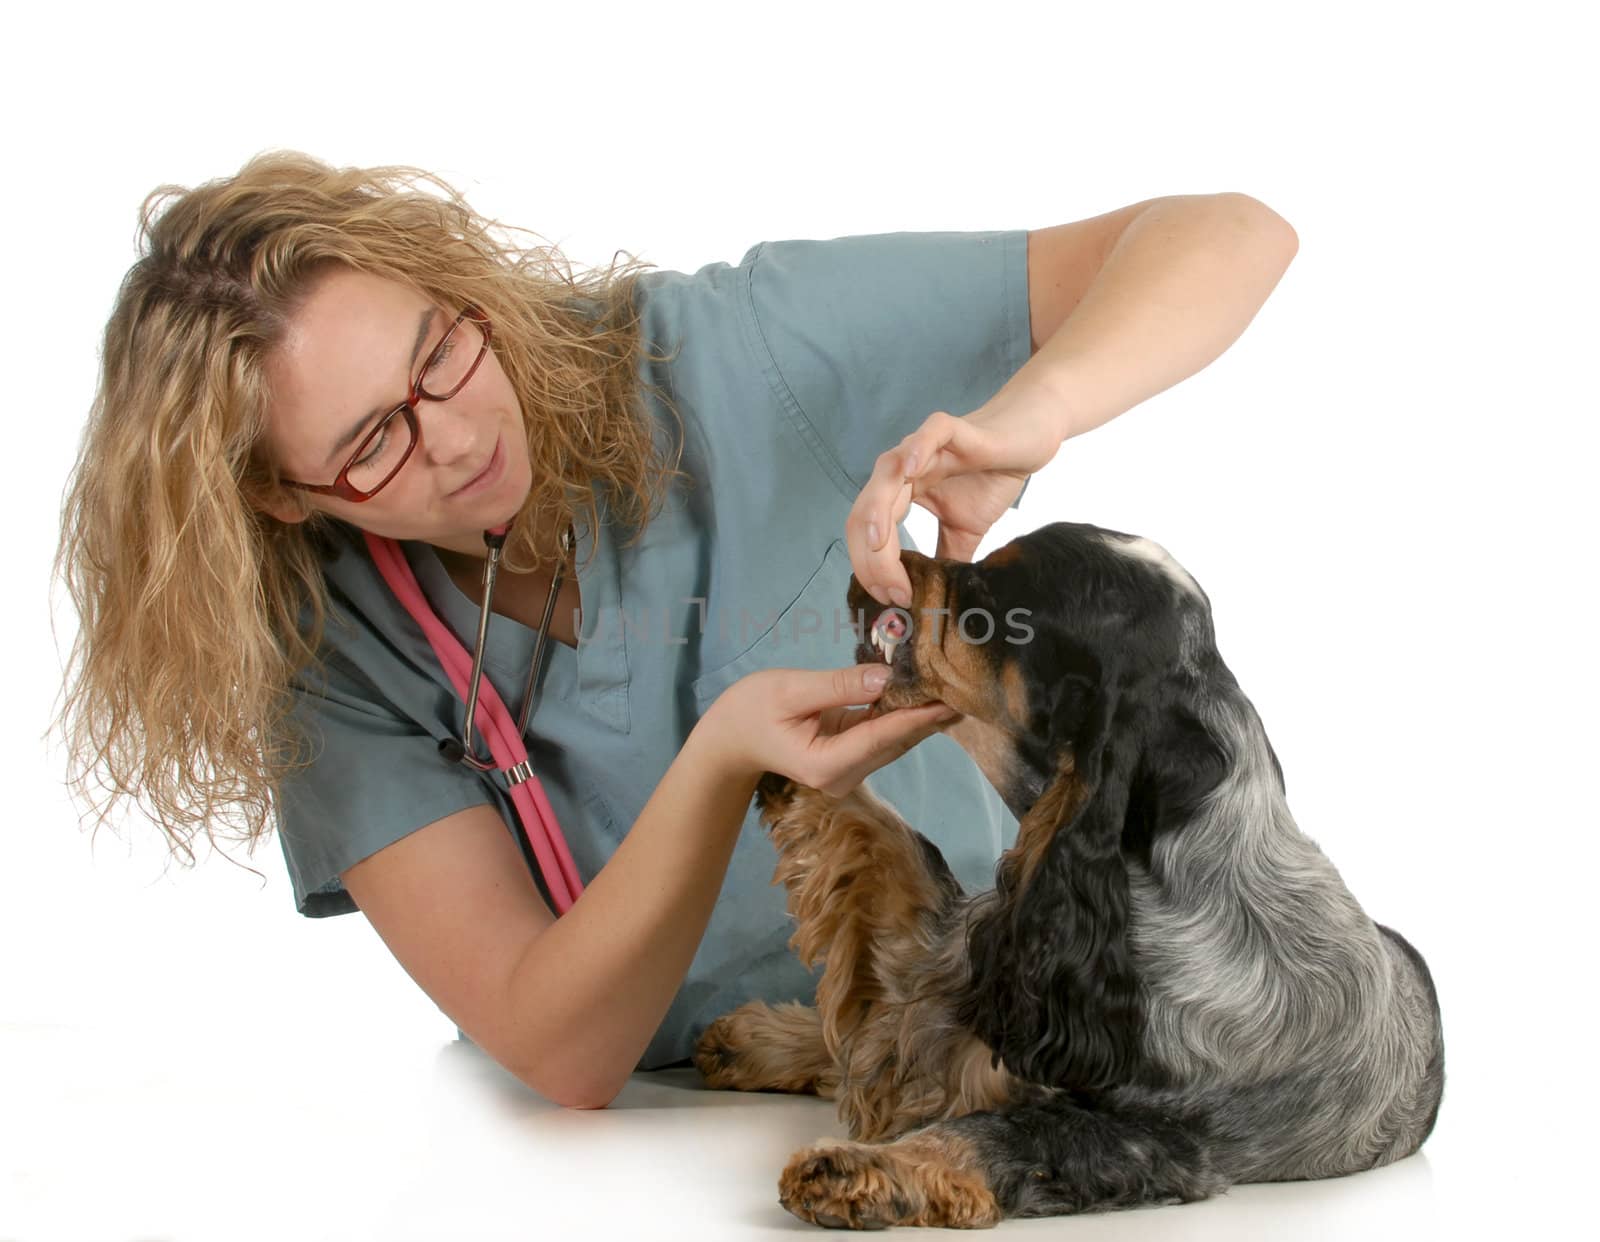 veterinary care by willeecole123